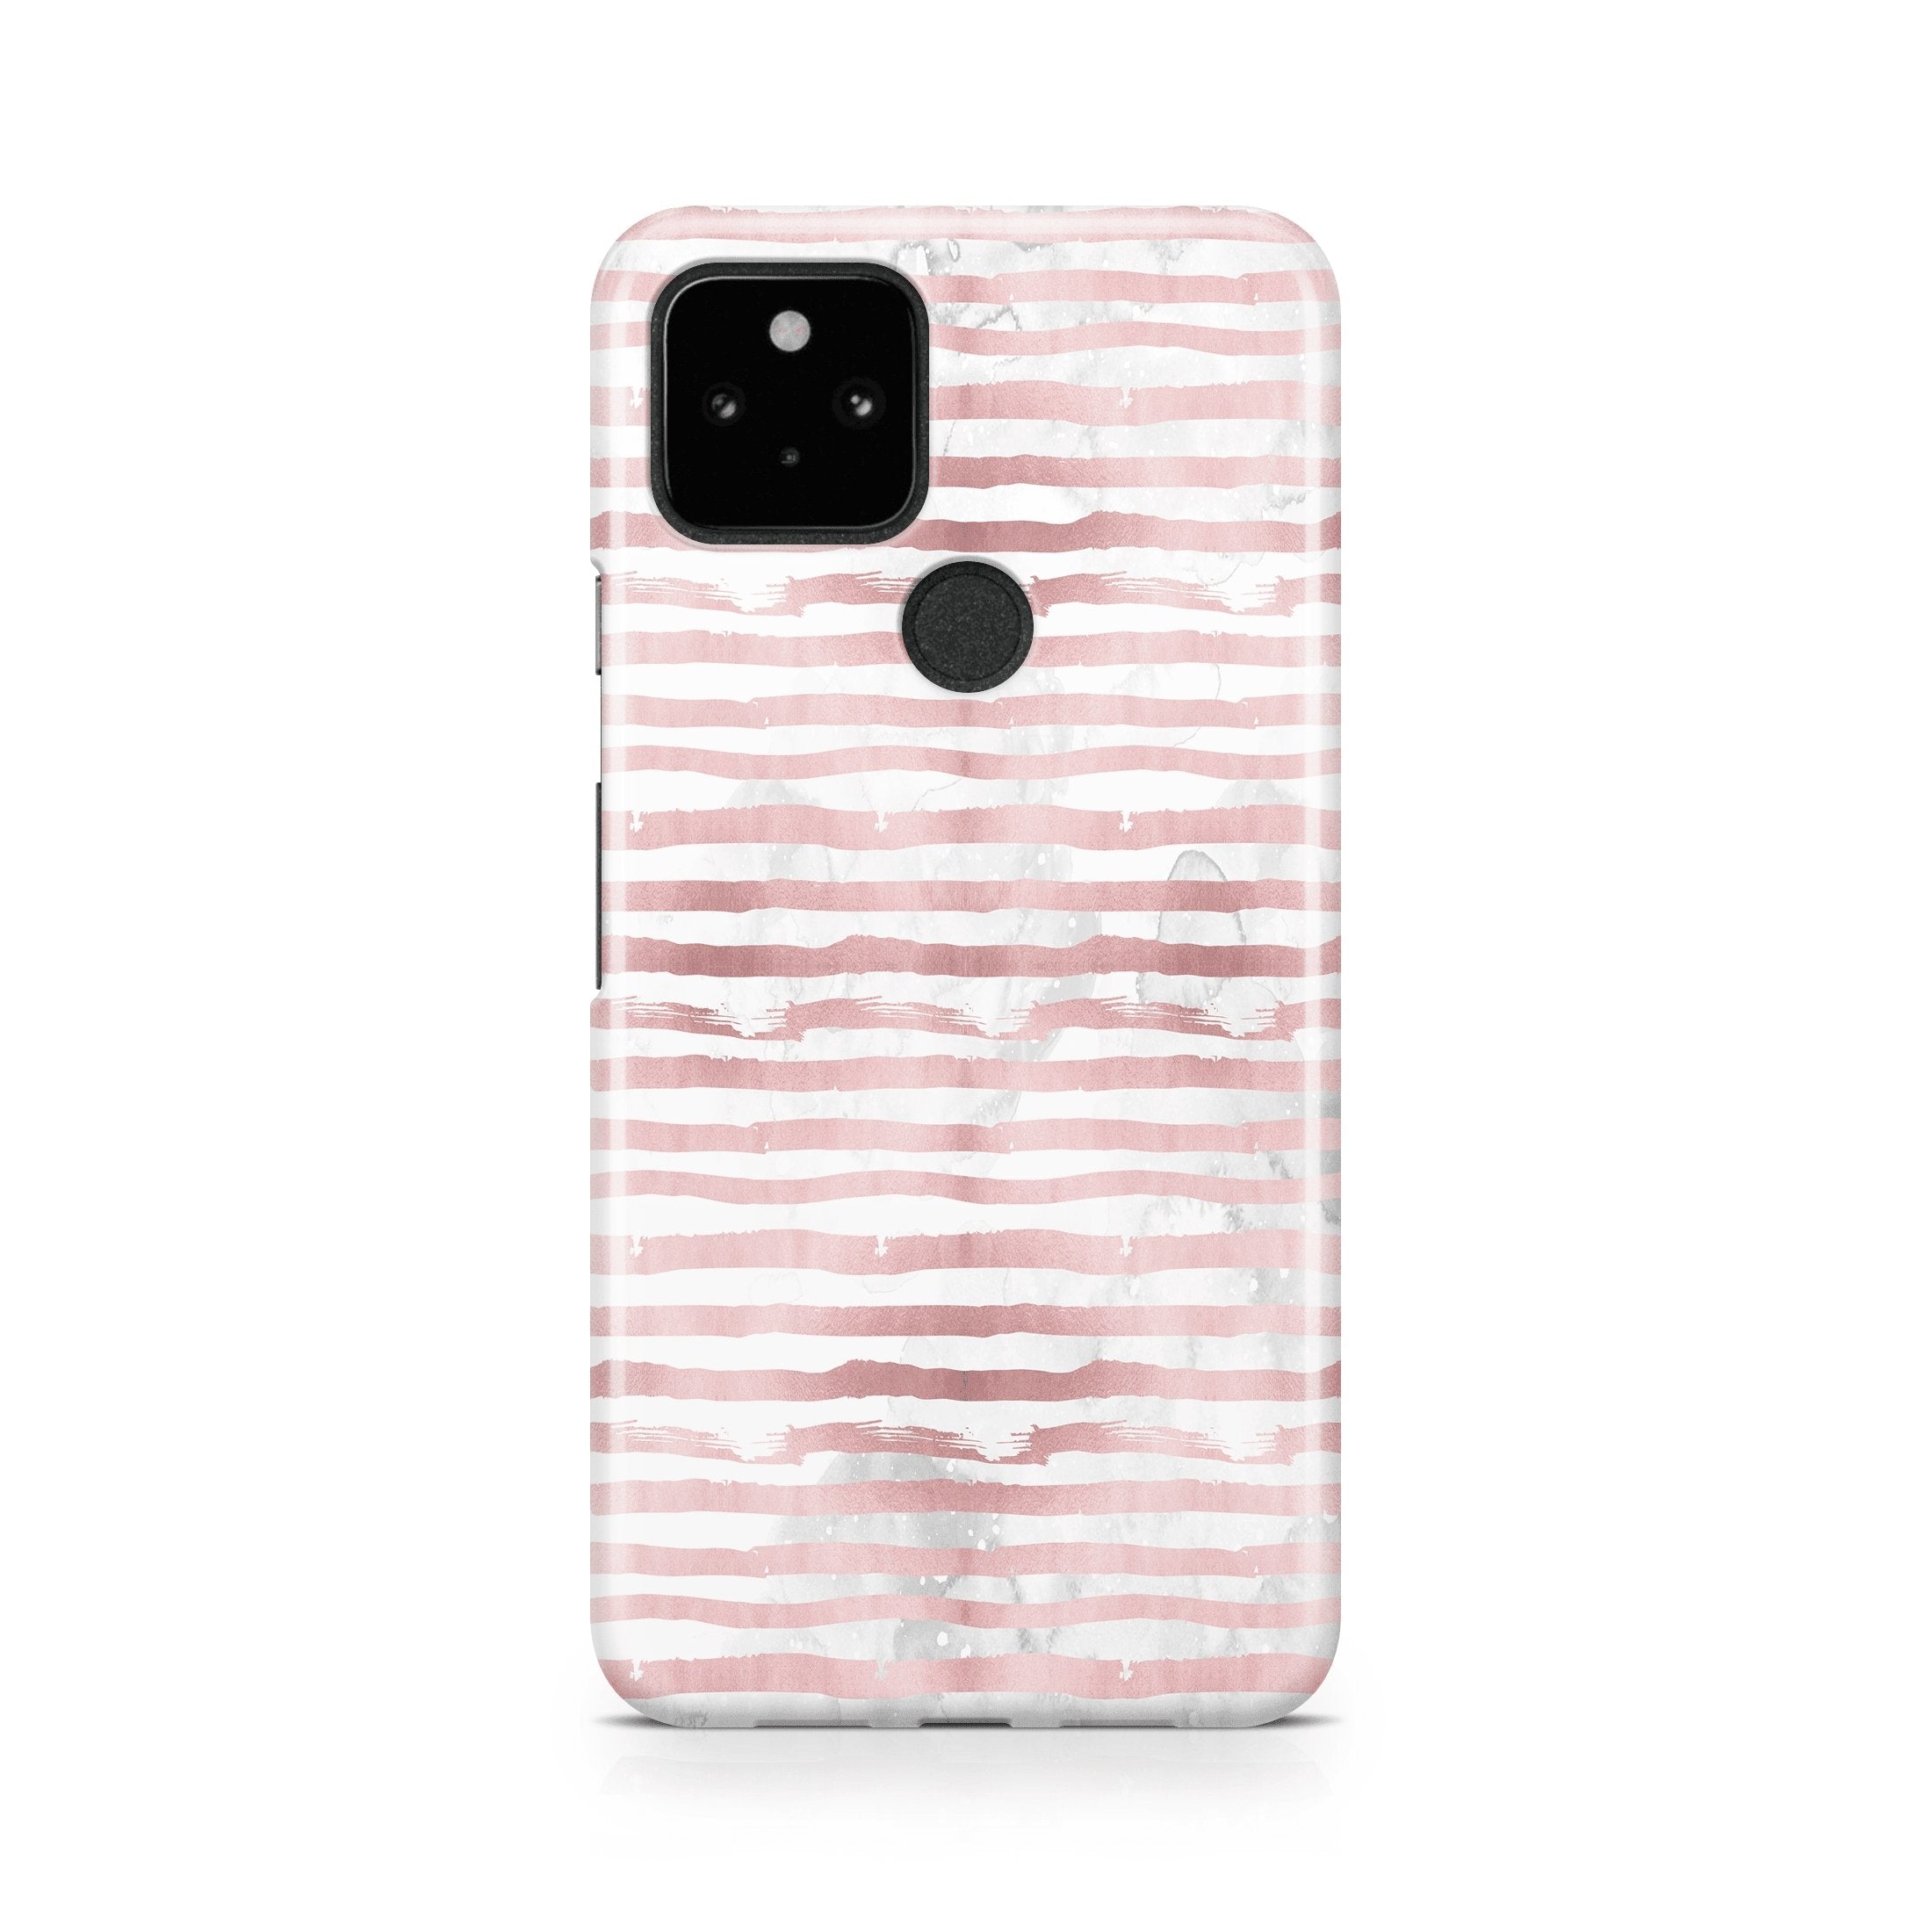 Lipstick Marble - Google phone case designs by CaseSwagger